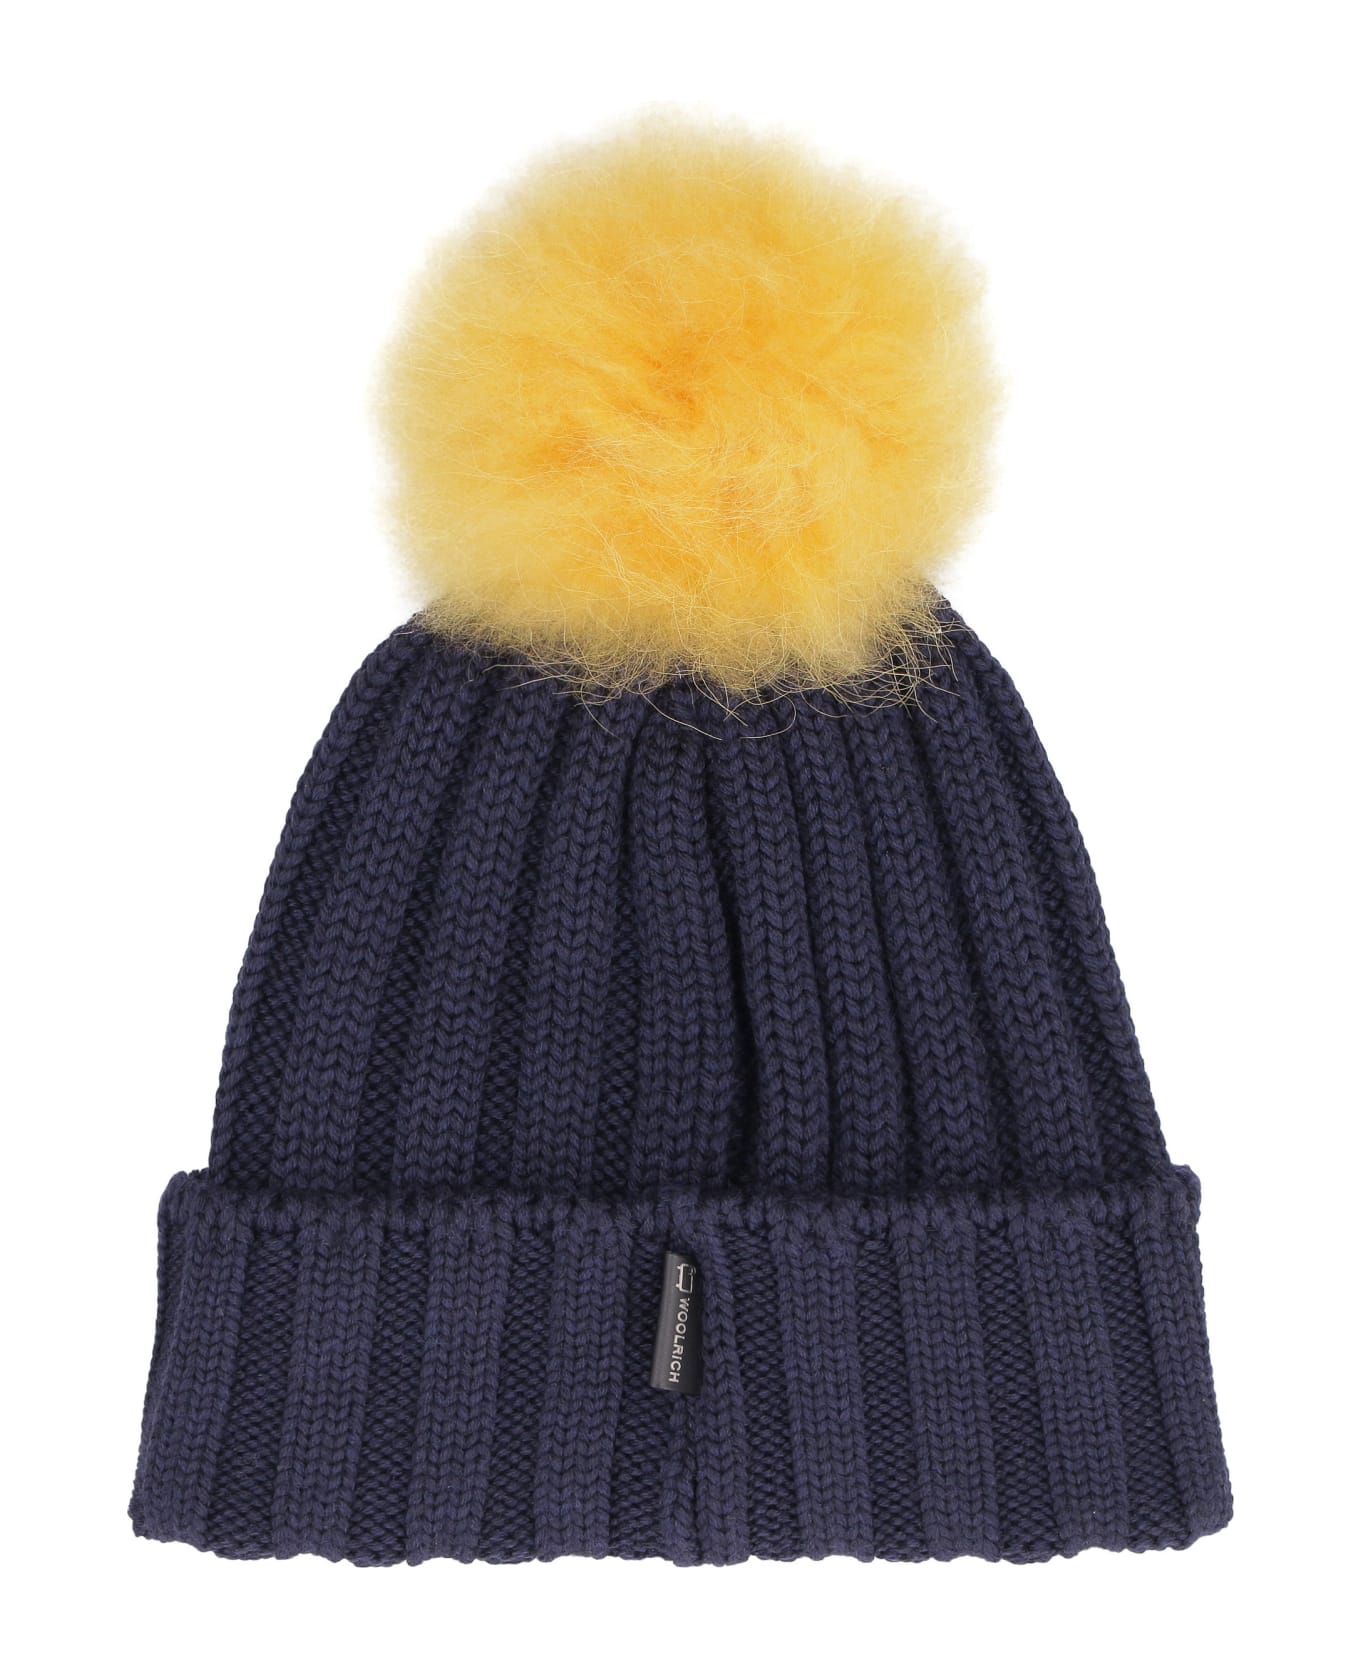 Woolrich Knitted Wool Hat With Pom-pom - blue 帽子